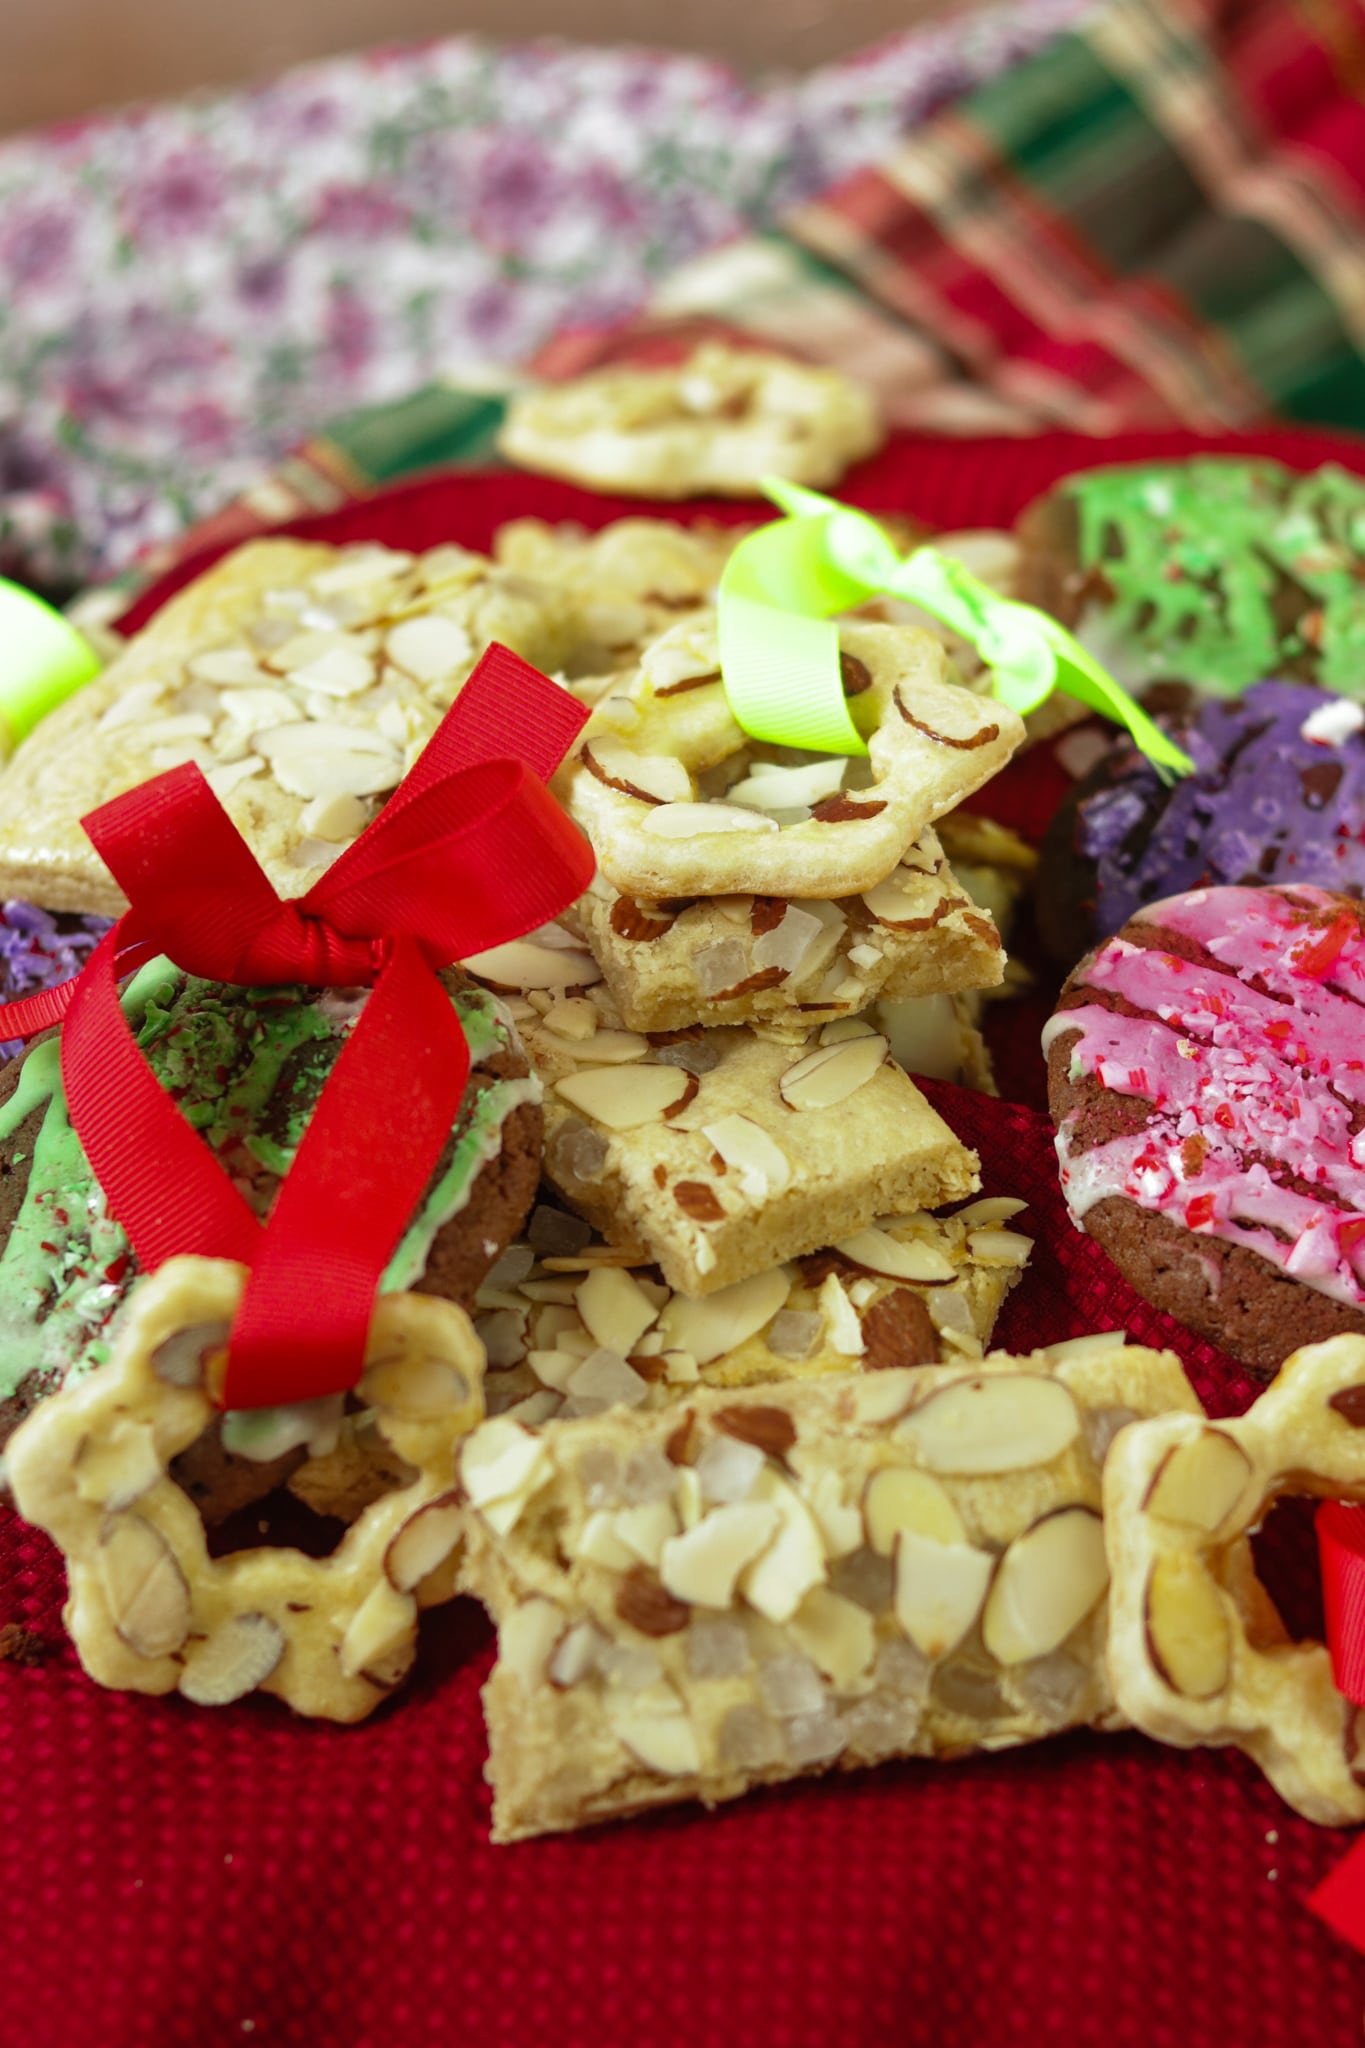 Platter of Christmas Cookies with ribbons